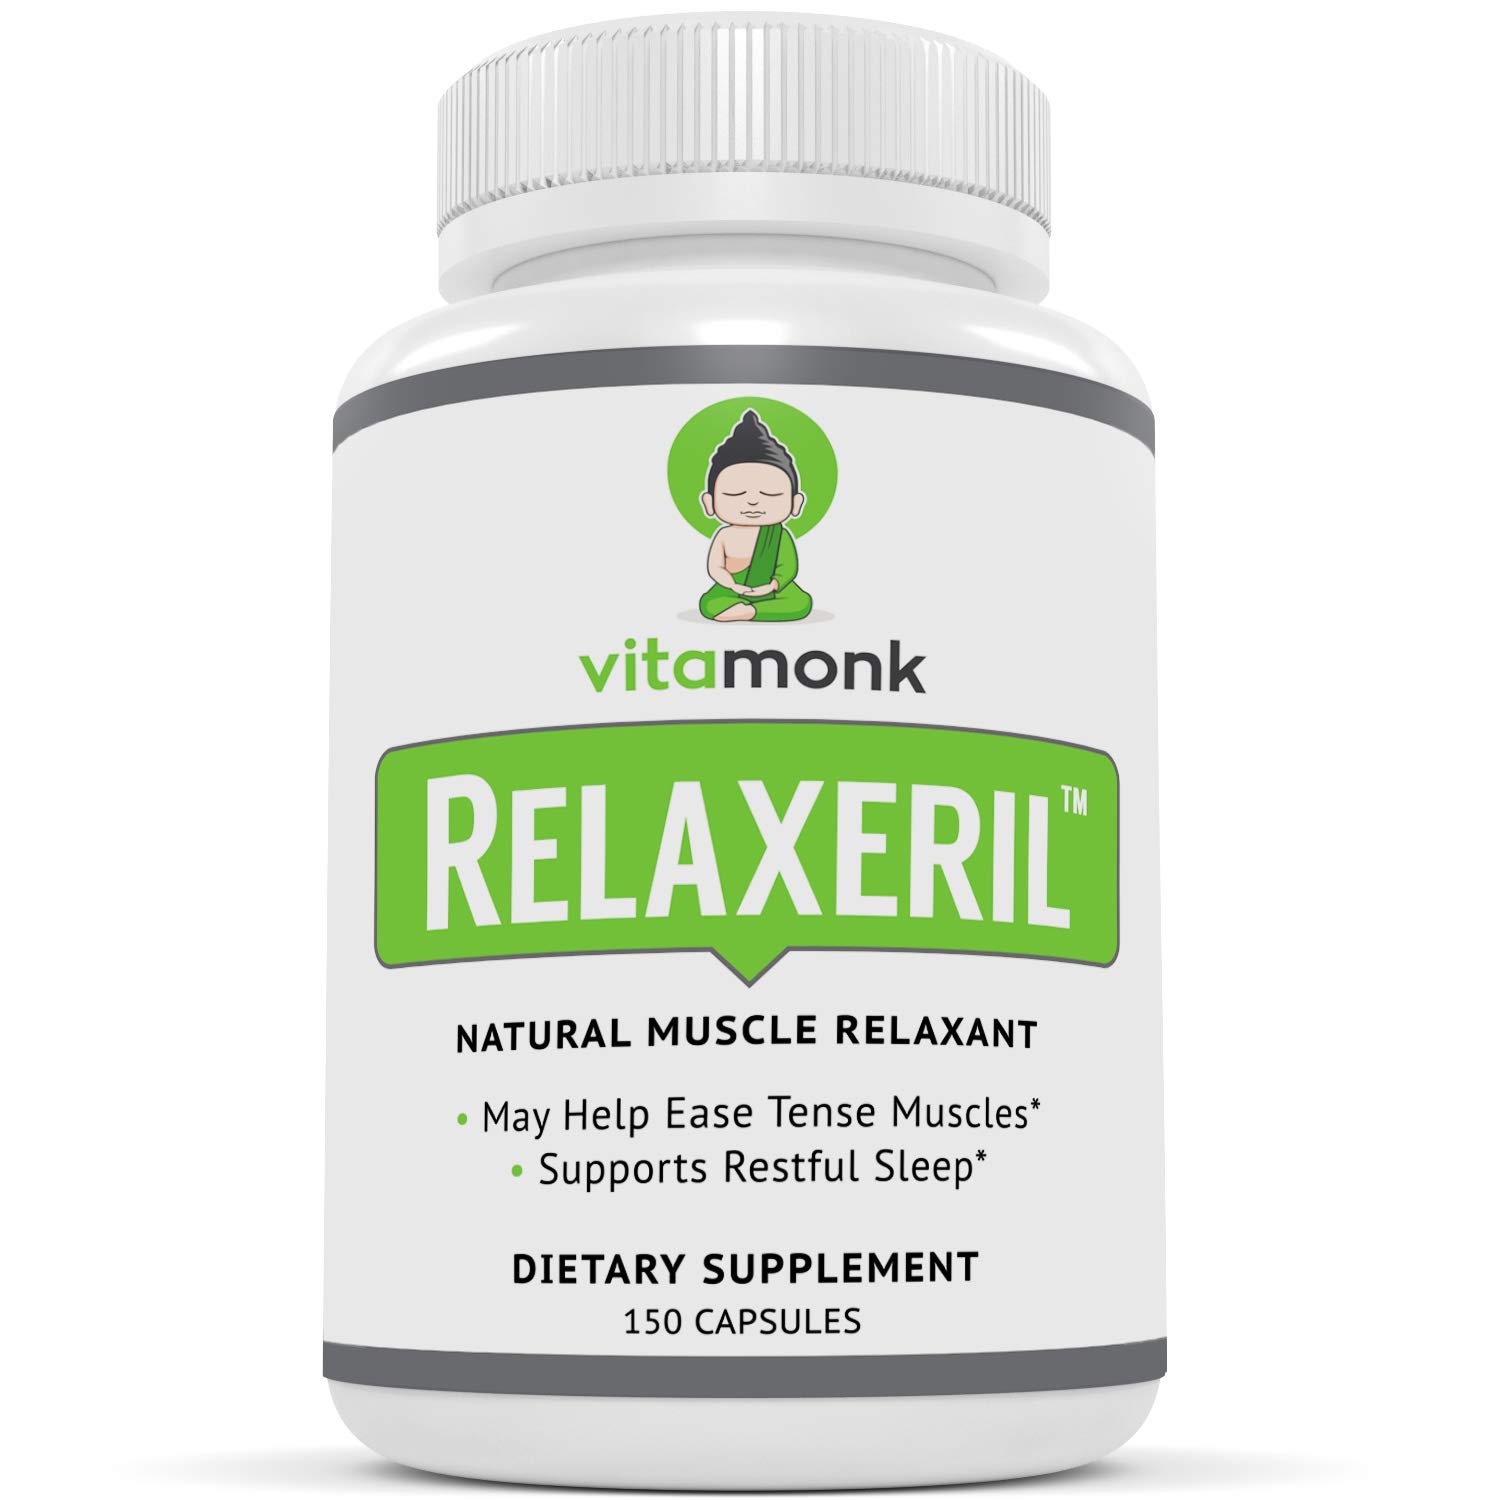 VitaMonk Relaxeril All-Natural Muscle Relaxer - Complete Formula for Lasting Leg